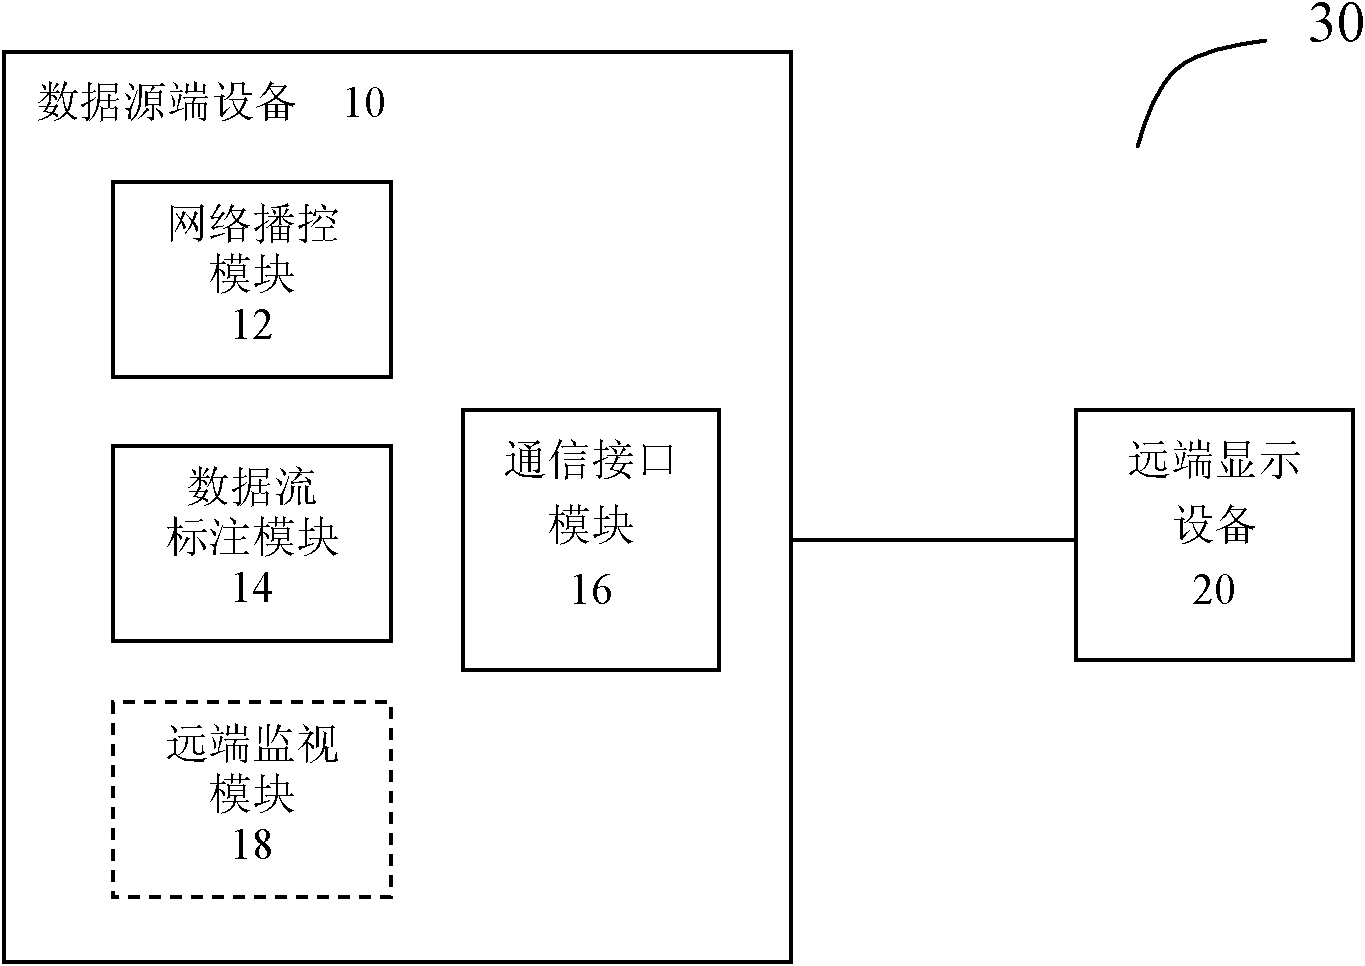 LED large screen display control system and method